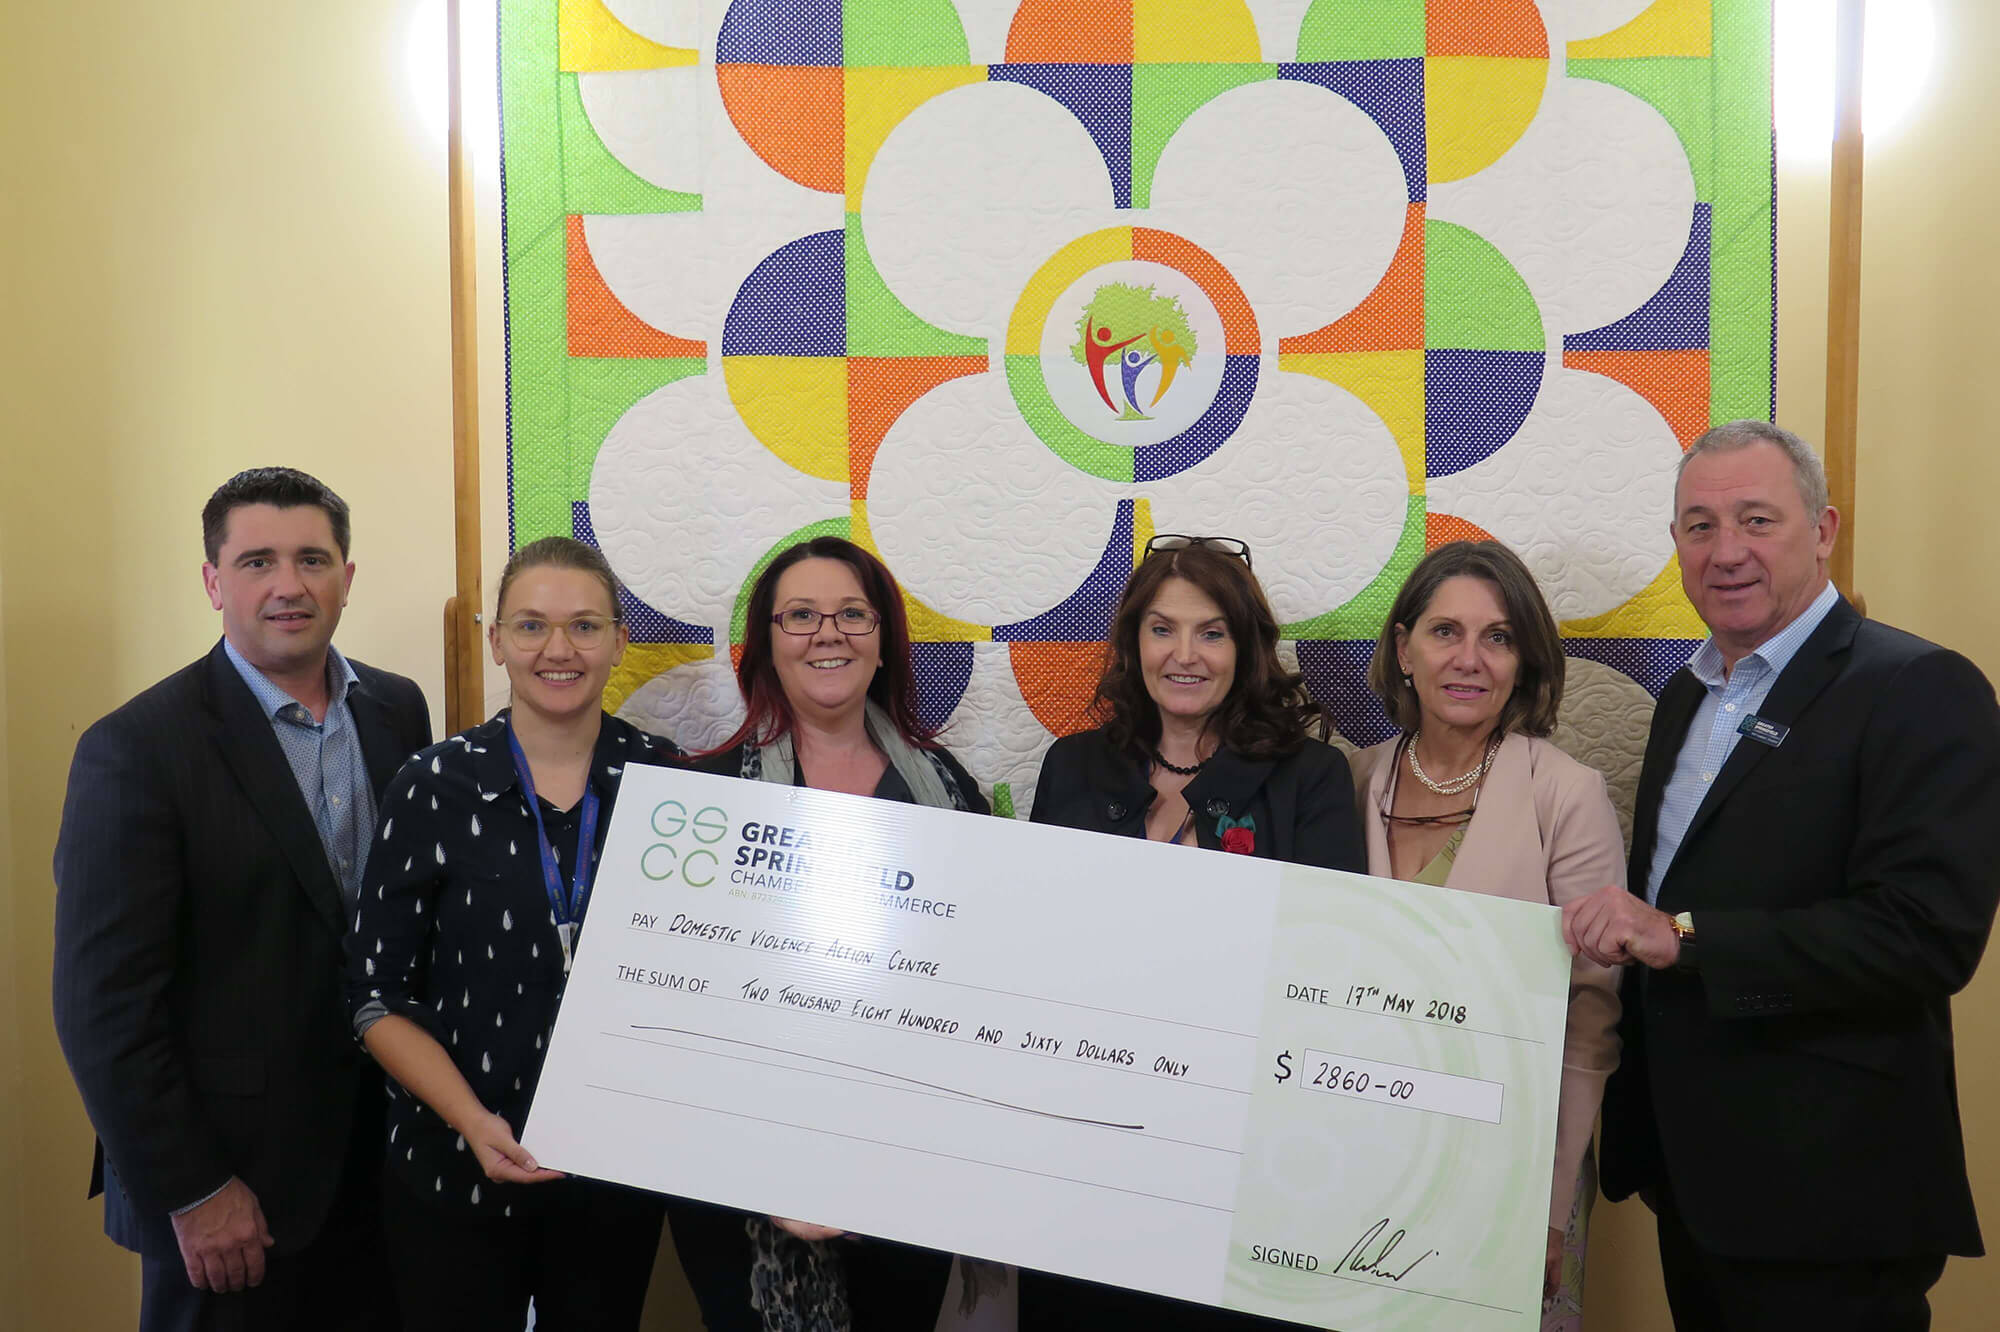 Presentation of Proceeds from International Women’s Day Lunch